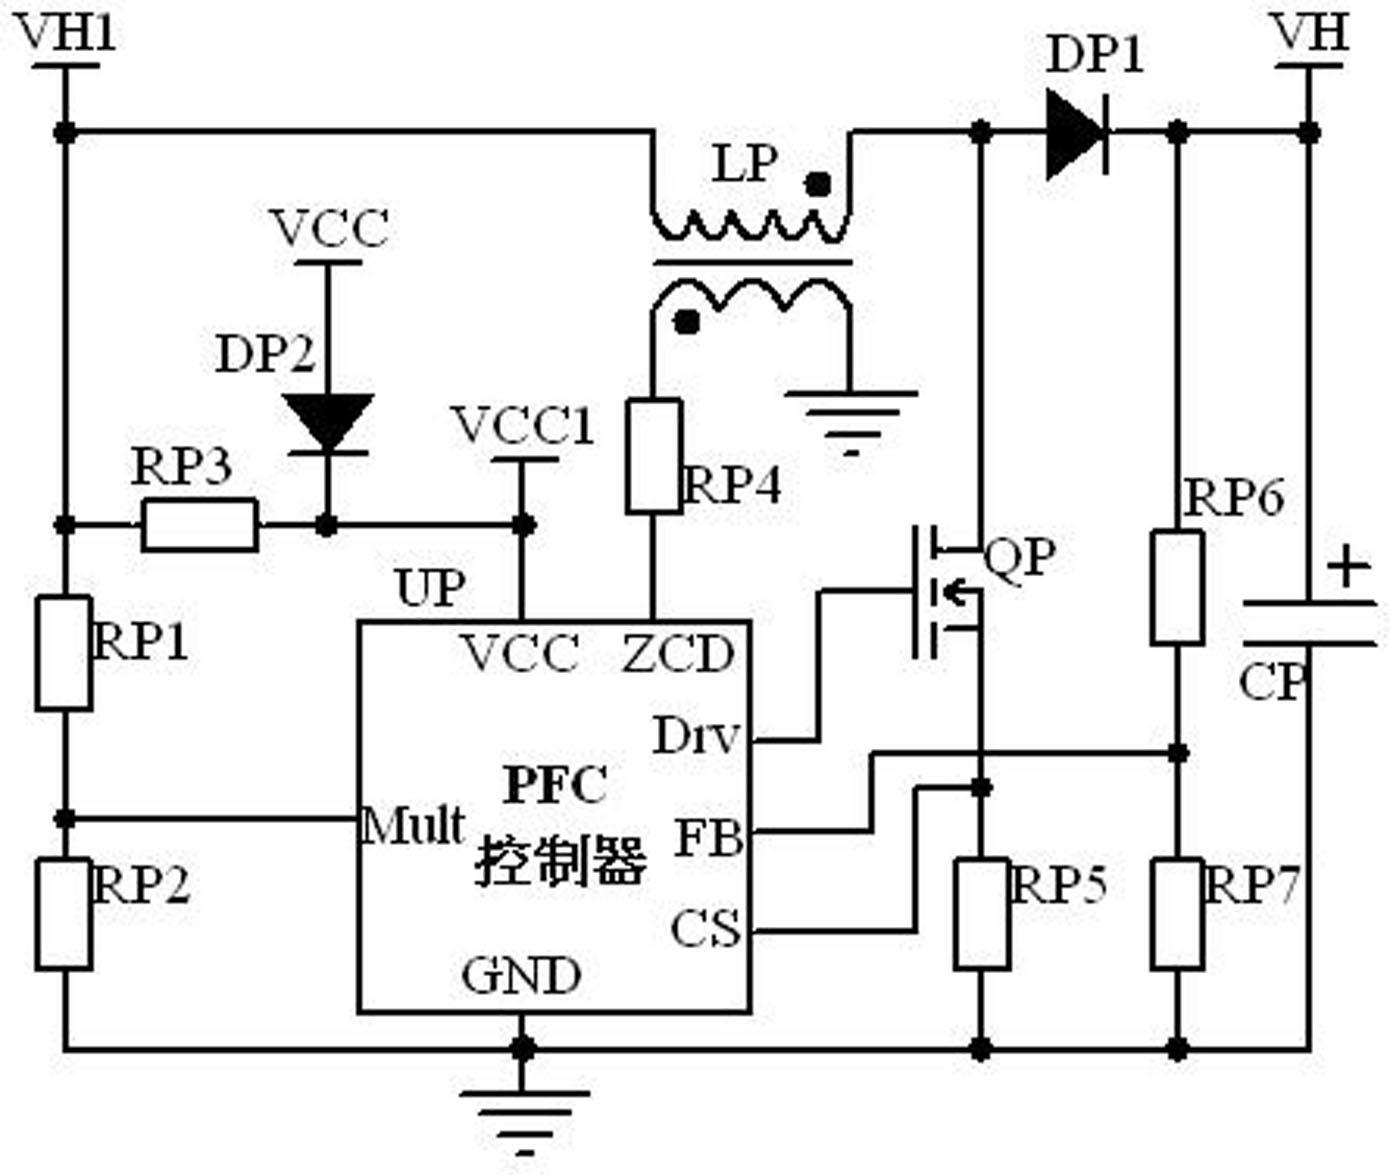 Self-protective variable frequency modulation ICP (Inductively Coupled Plasma) ballast